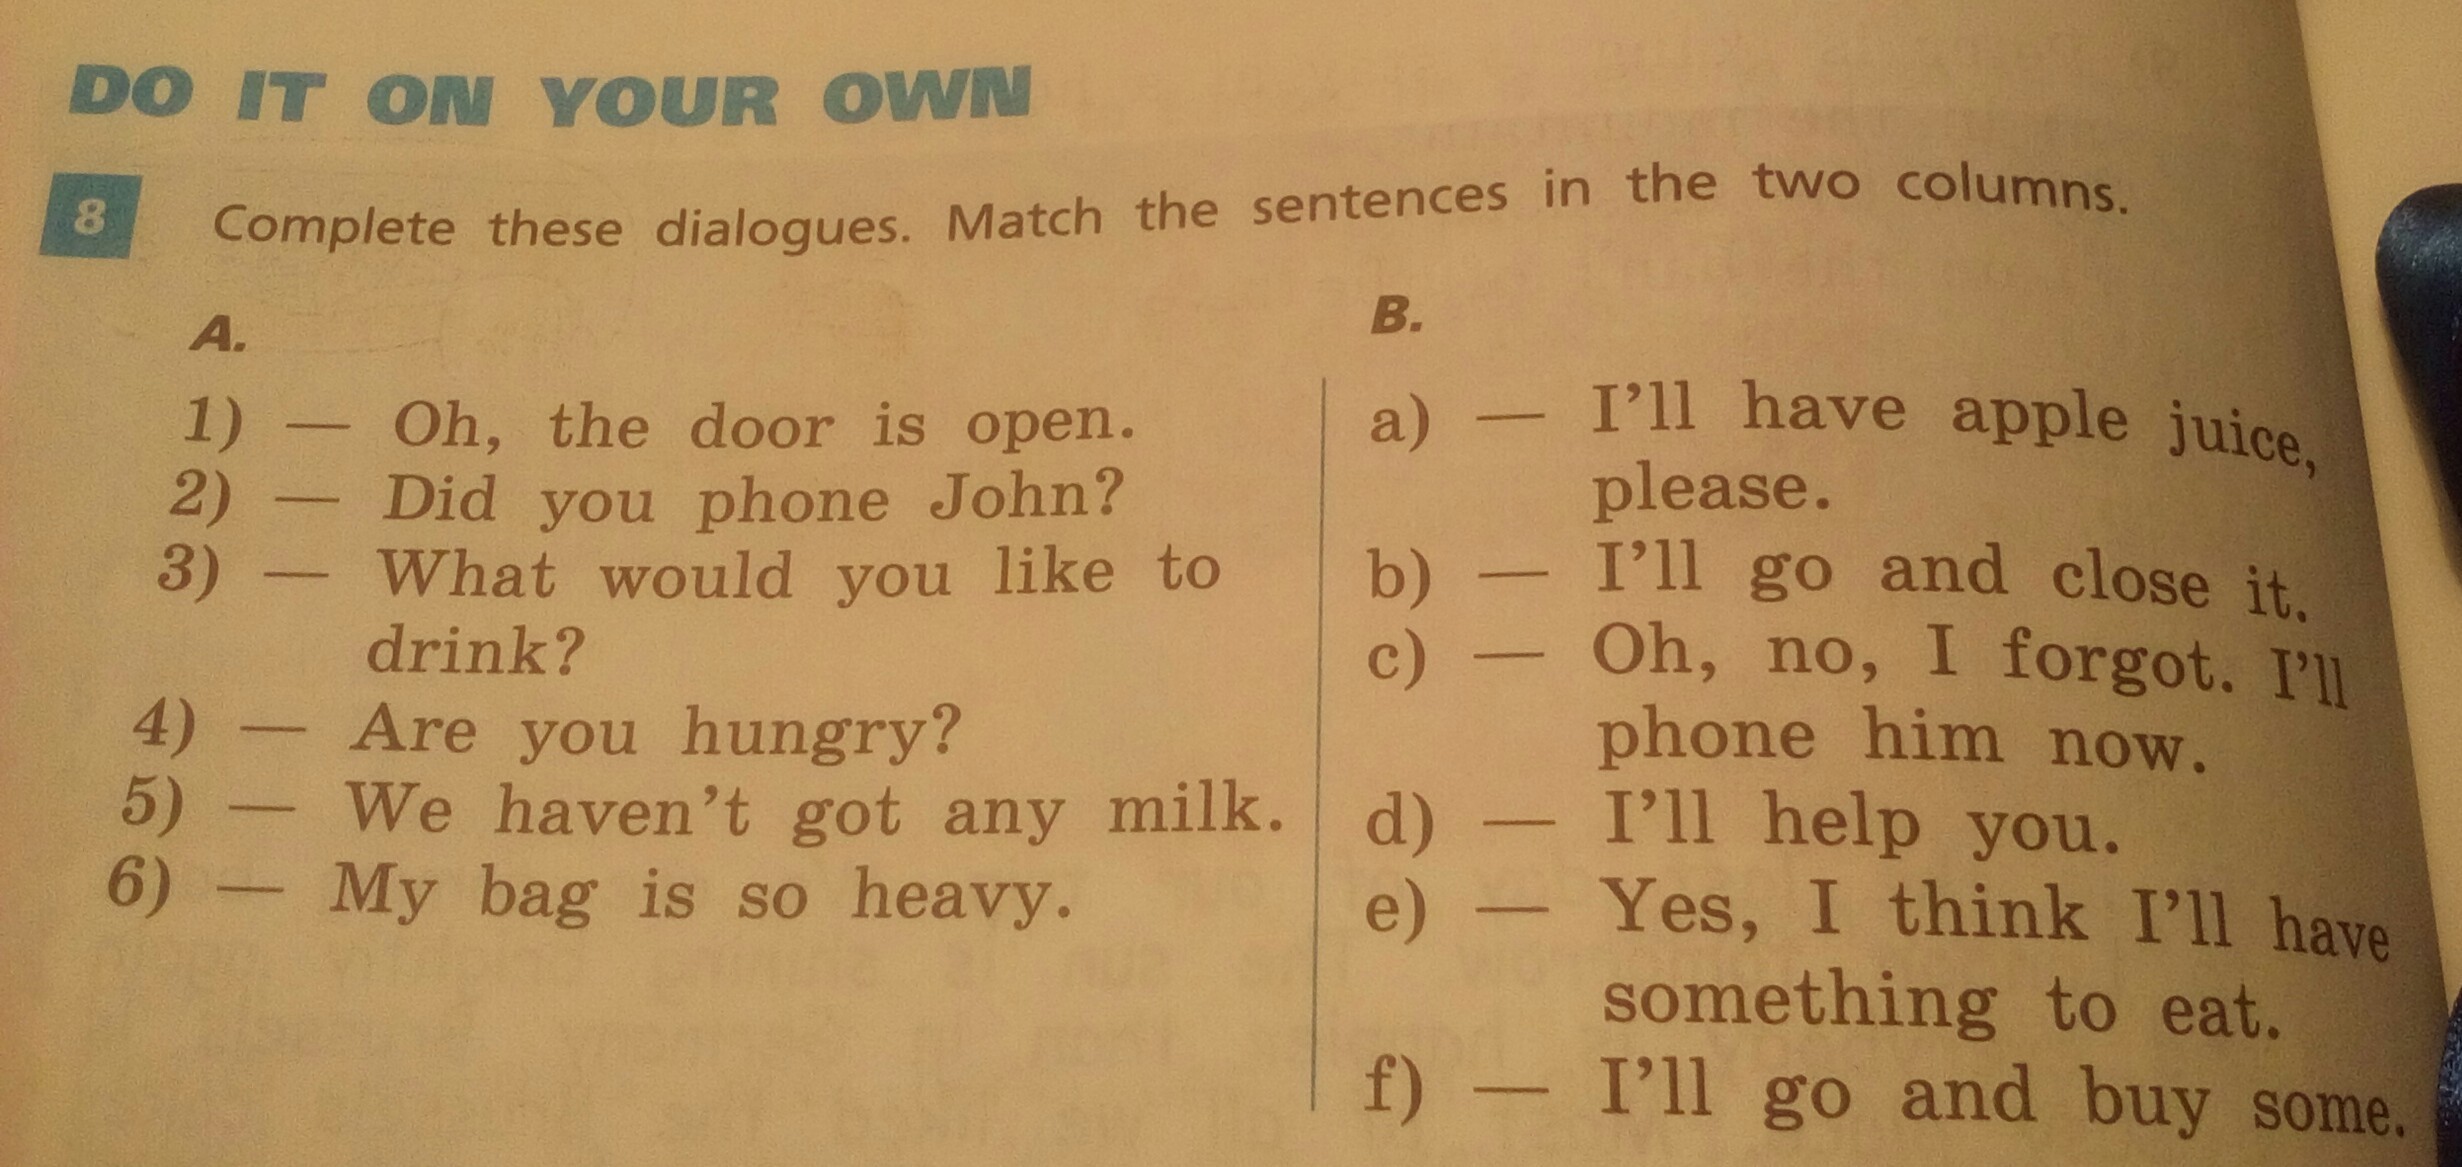 Complete the short dialogues